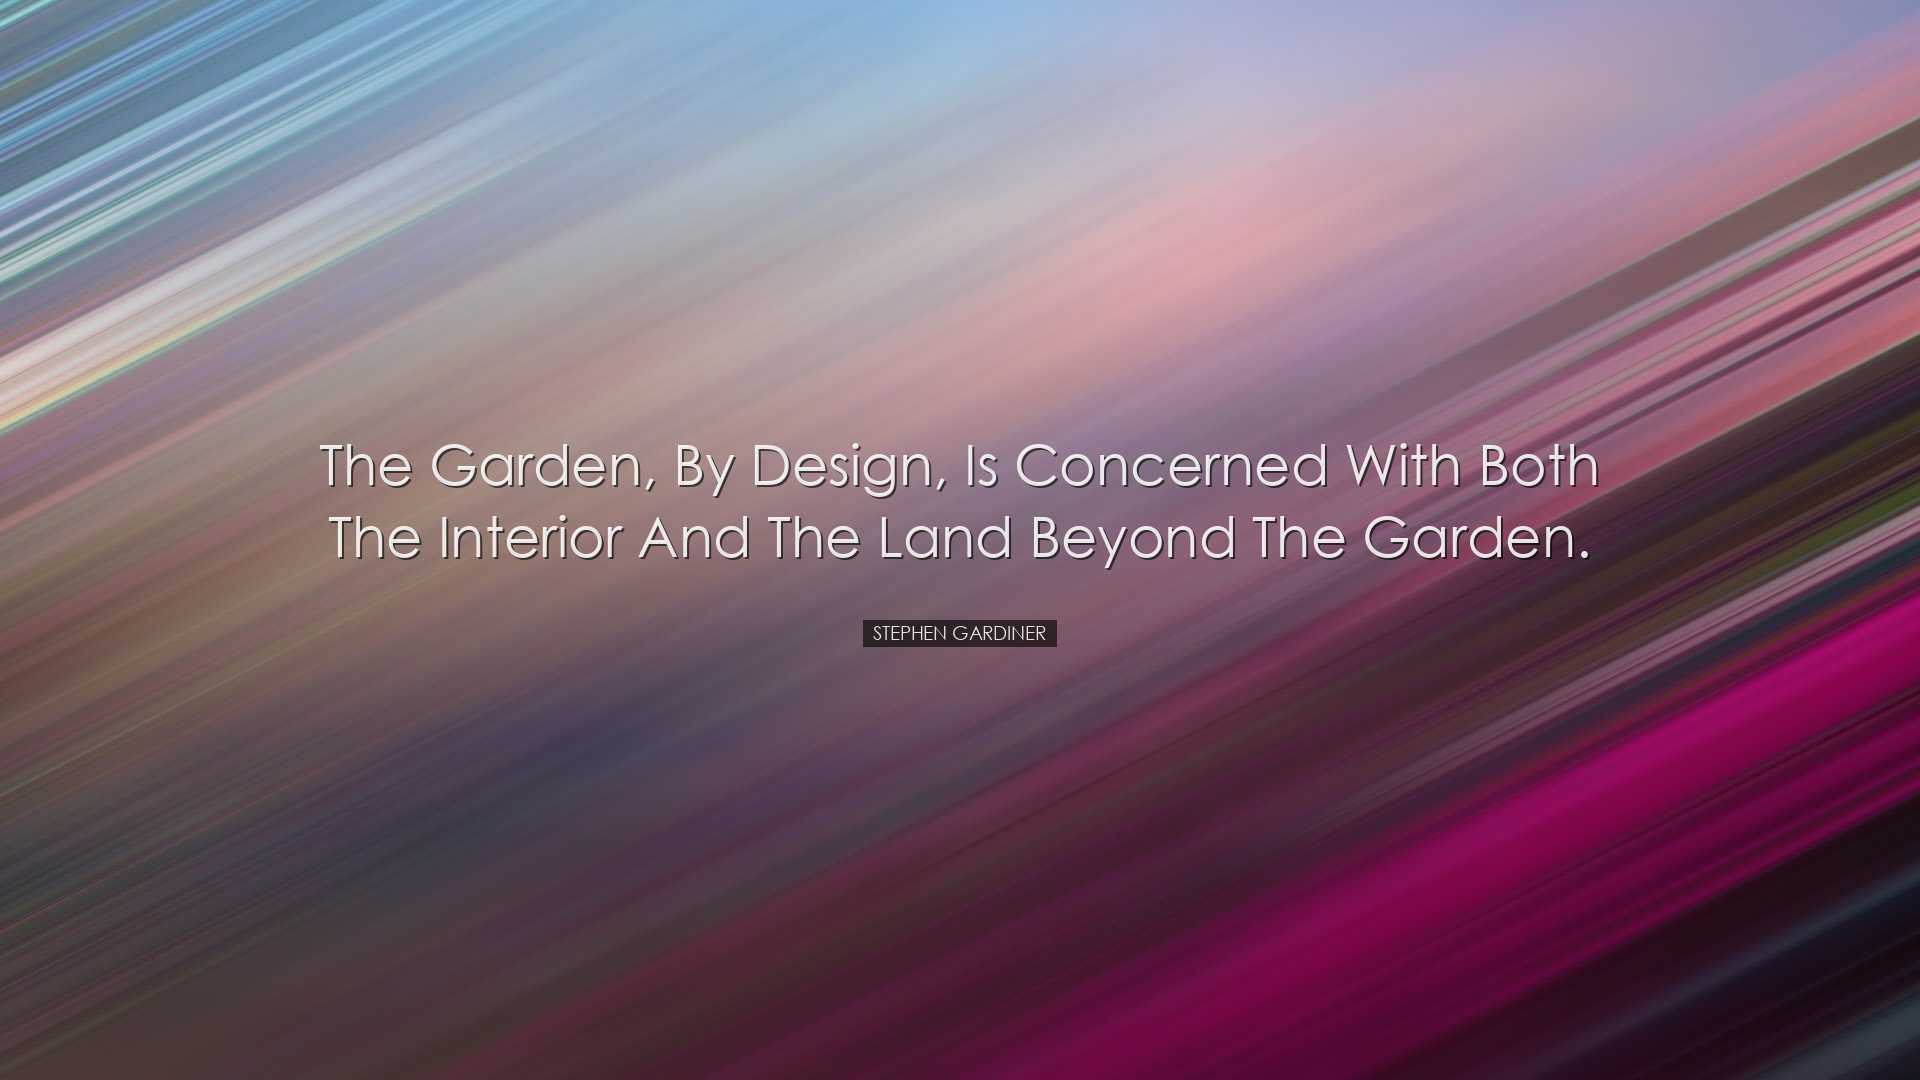 The garden, by design, is concerned with both the interior and the